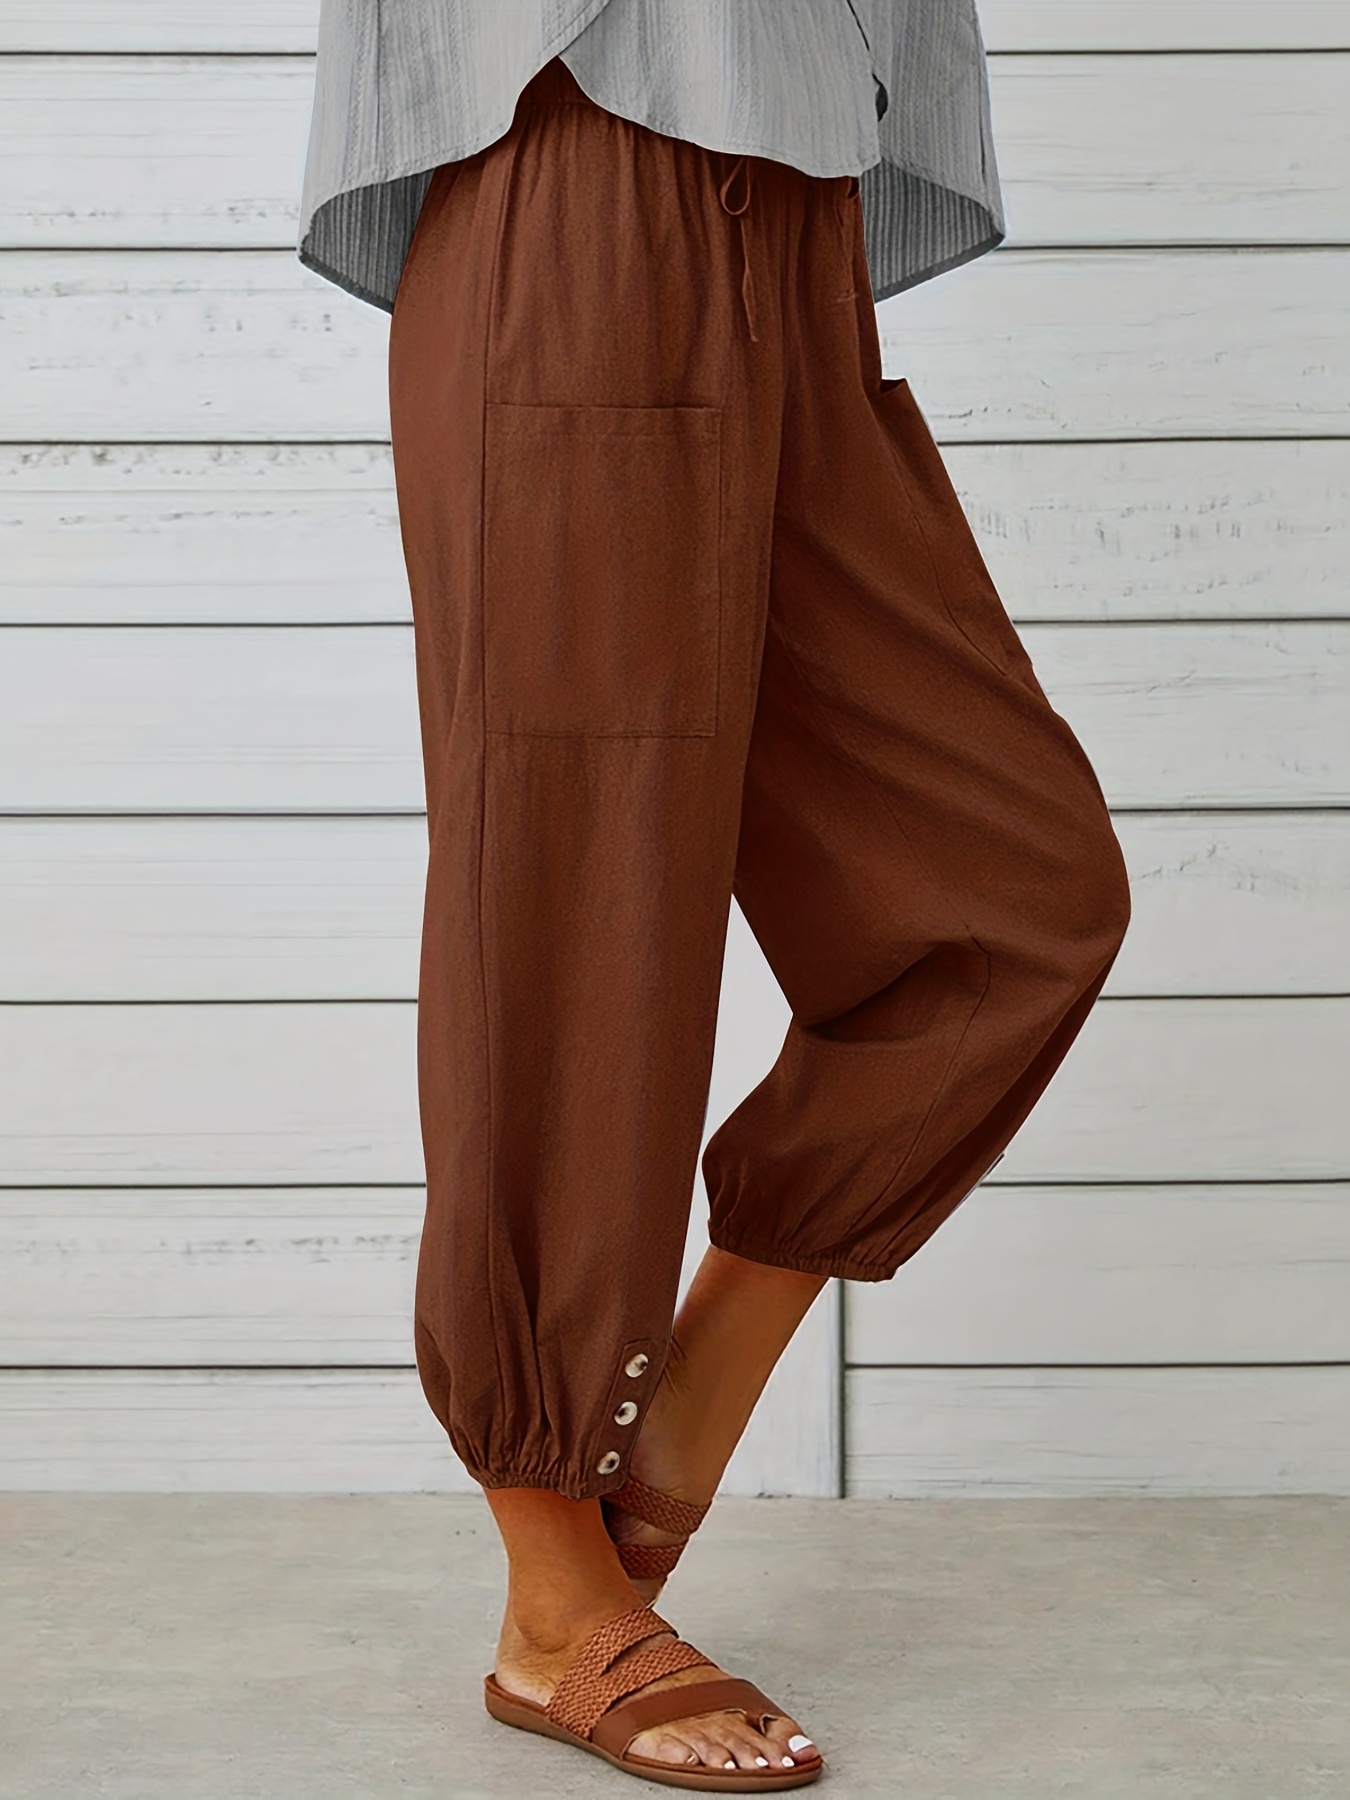 Women's Brown Drawstring Elastic Waist Pull-on Casual Pants with